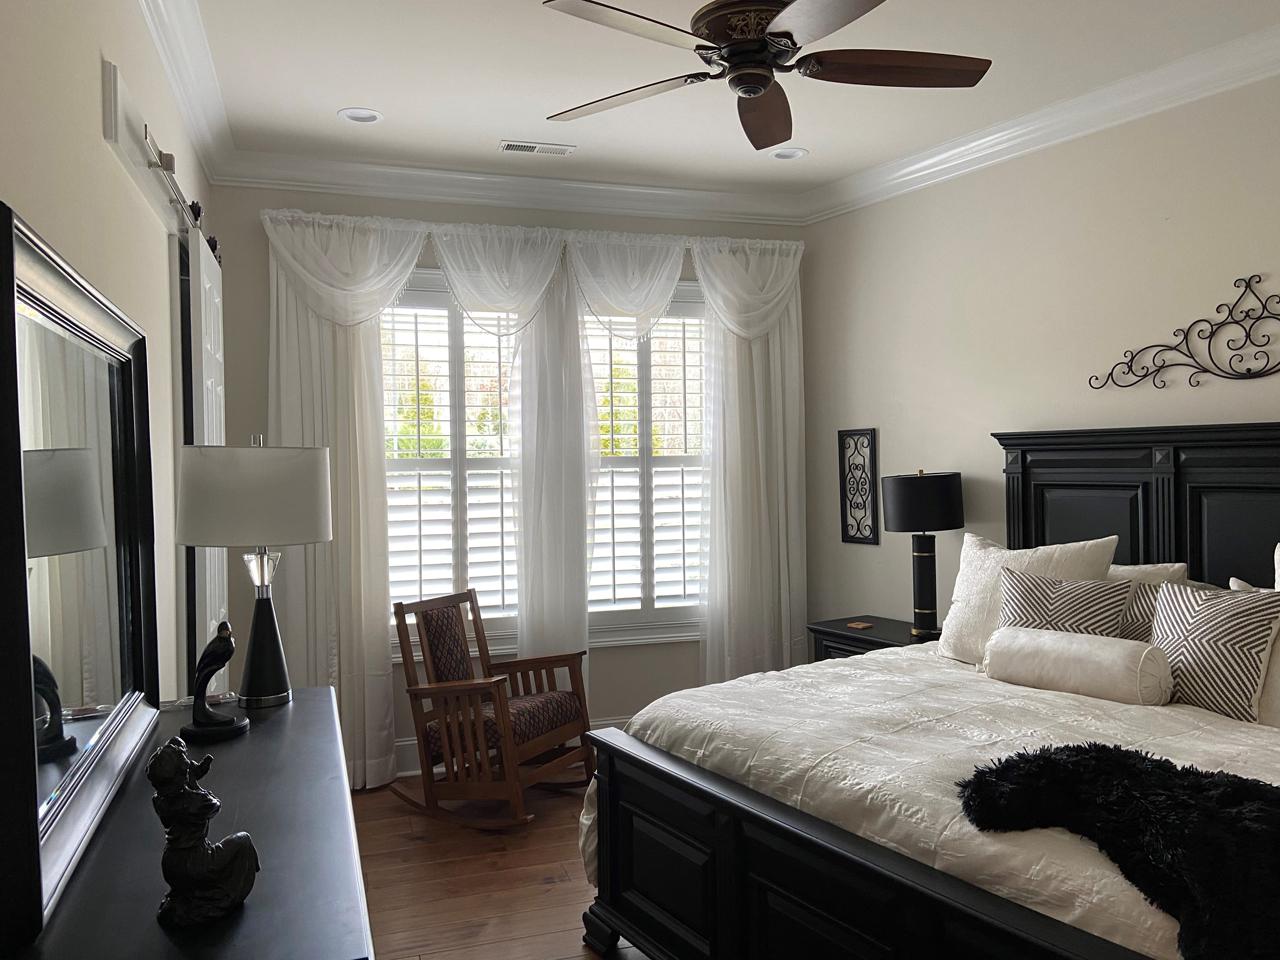 Bedroom with shutters and drapes